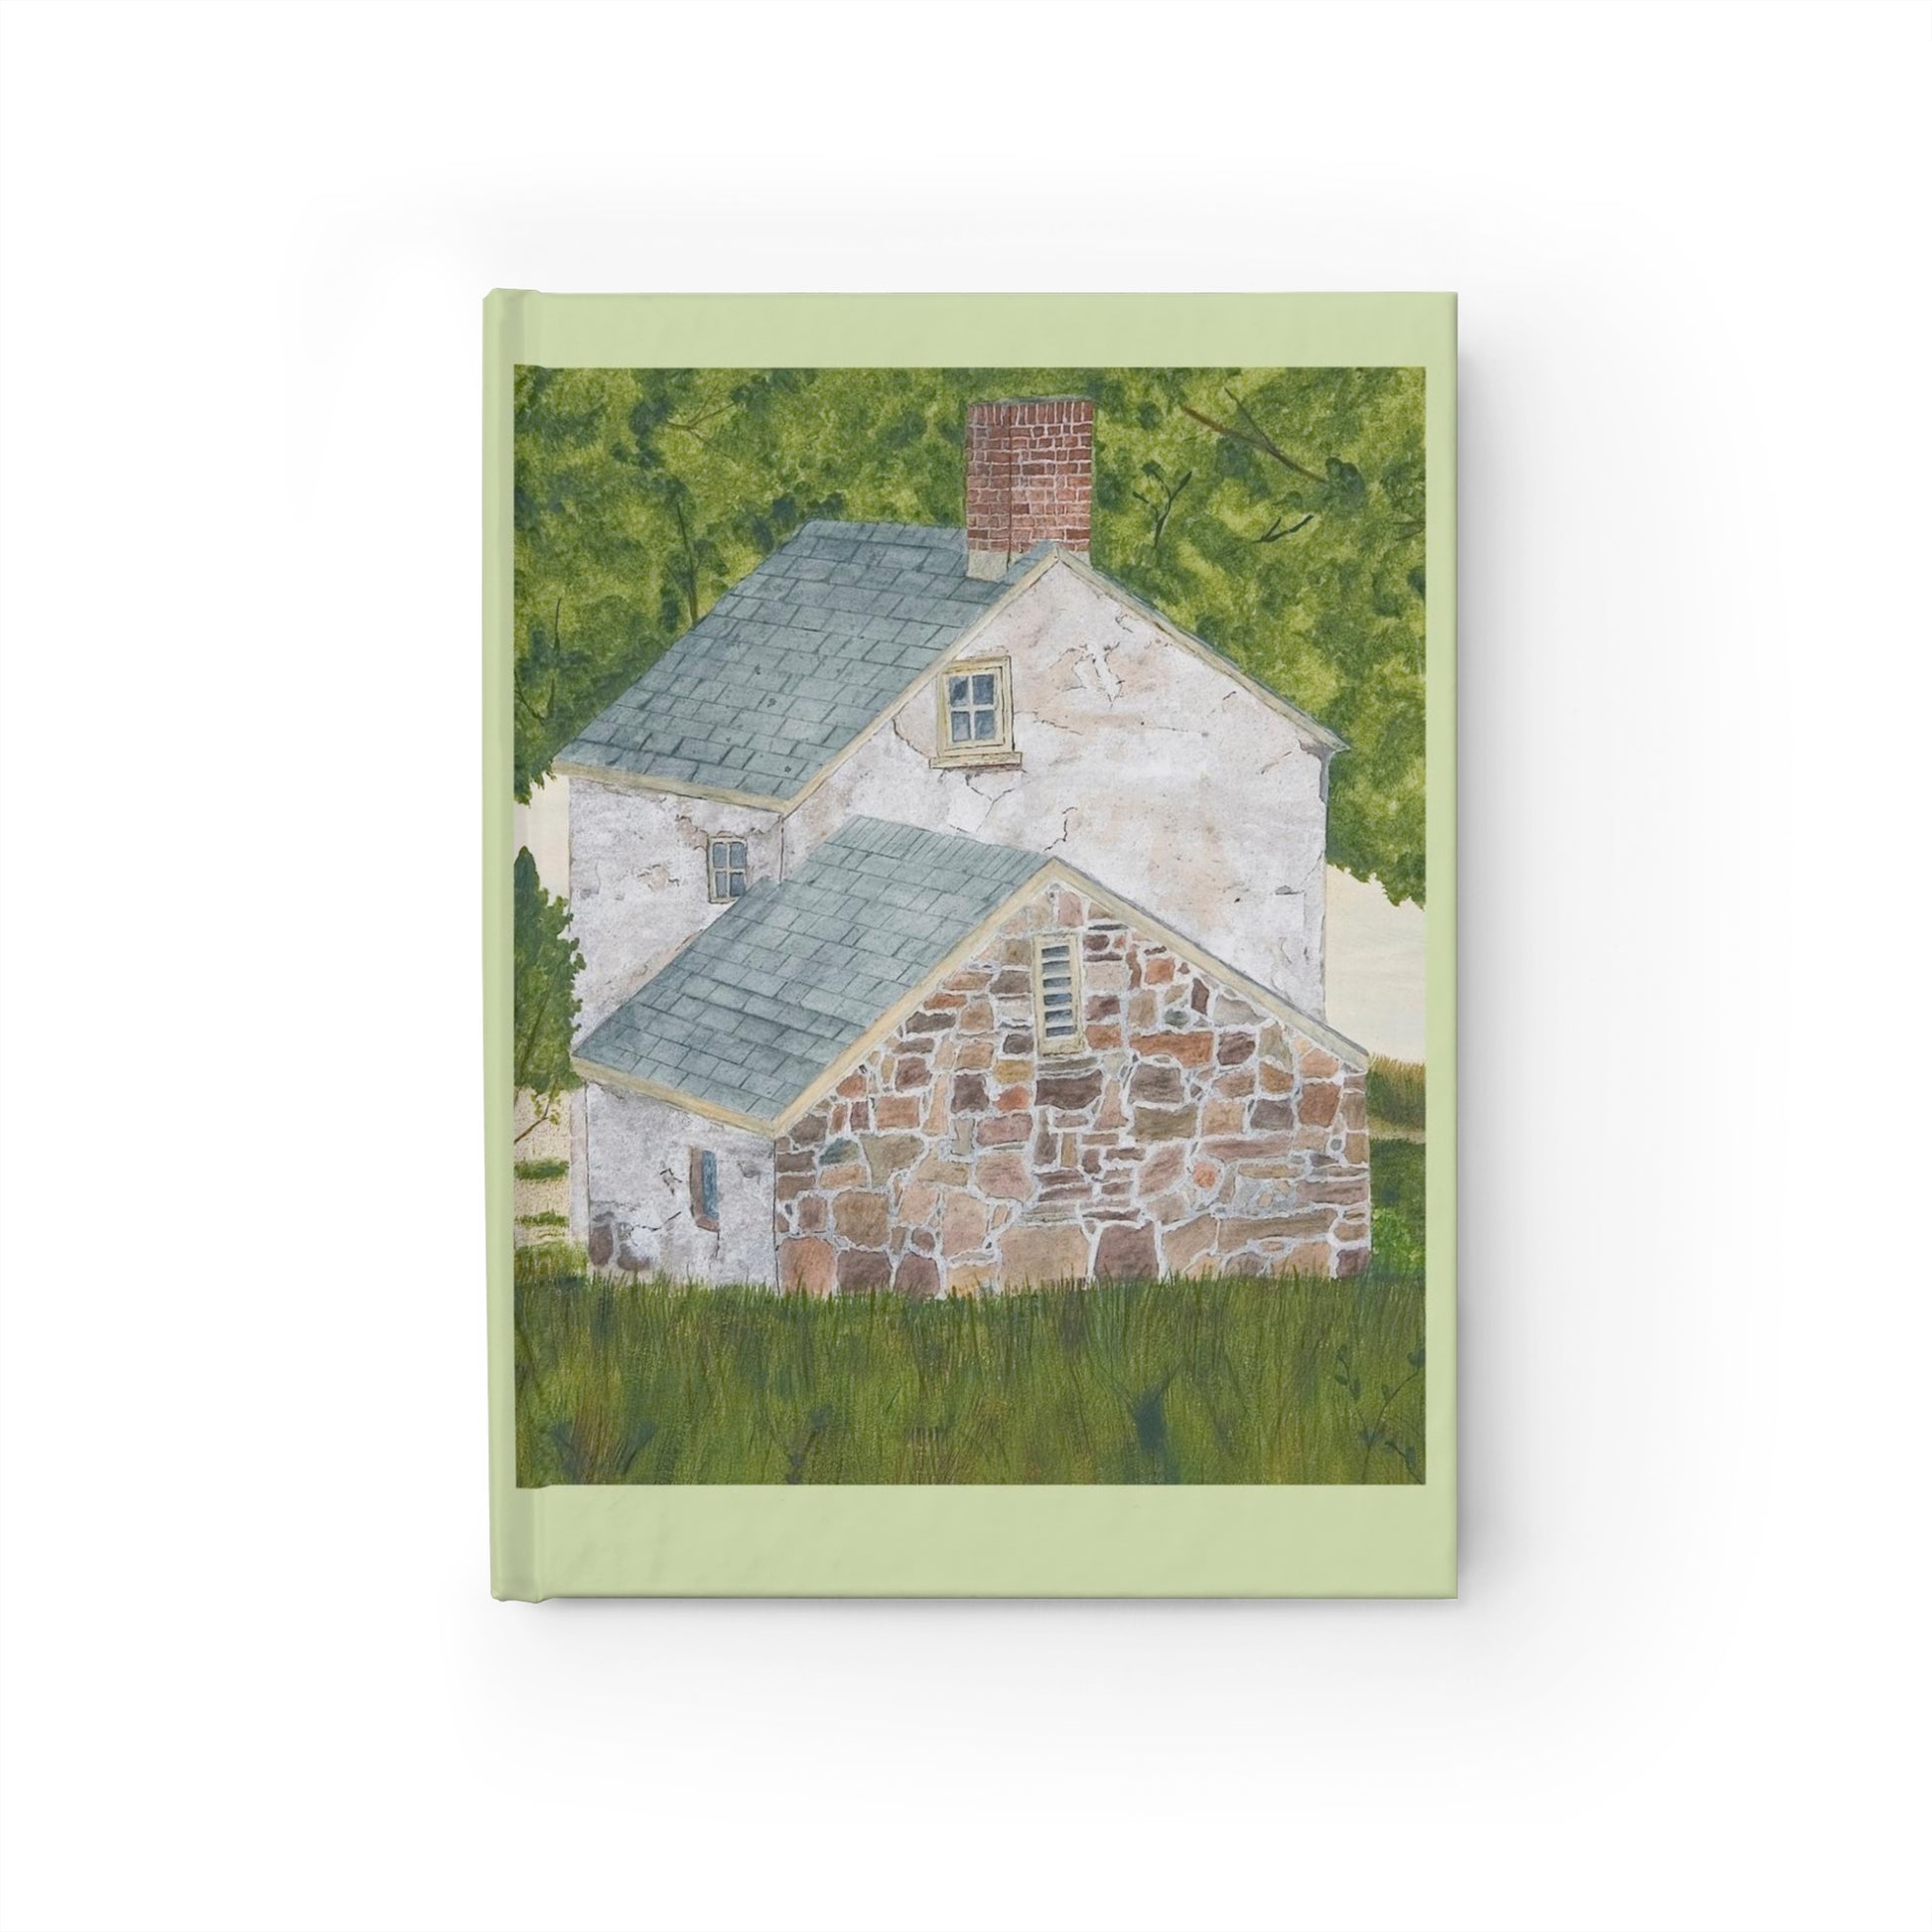 The Manor House By The Glen Journal captures the spirit of an old farmhouse nestled in the trees in Pennsylvania’s Washington Crossing State Park. This restful scene reflects the feeling of Spring in the country.